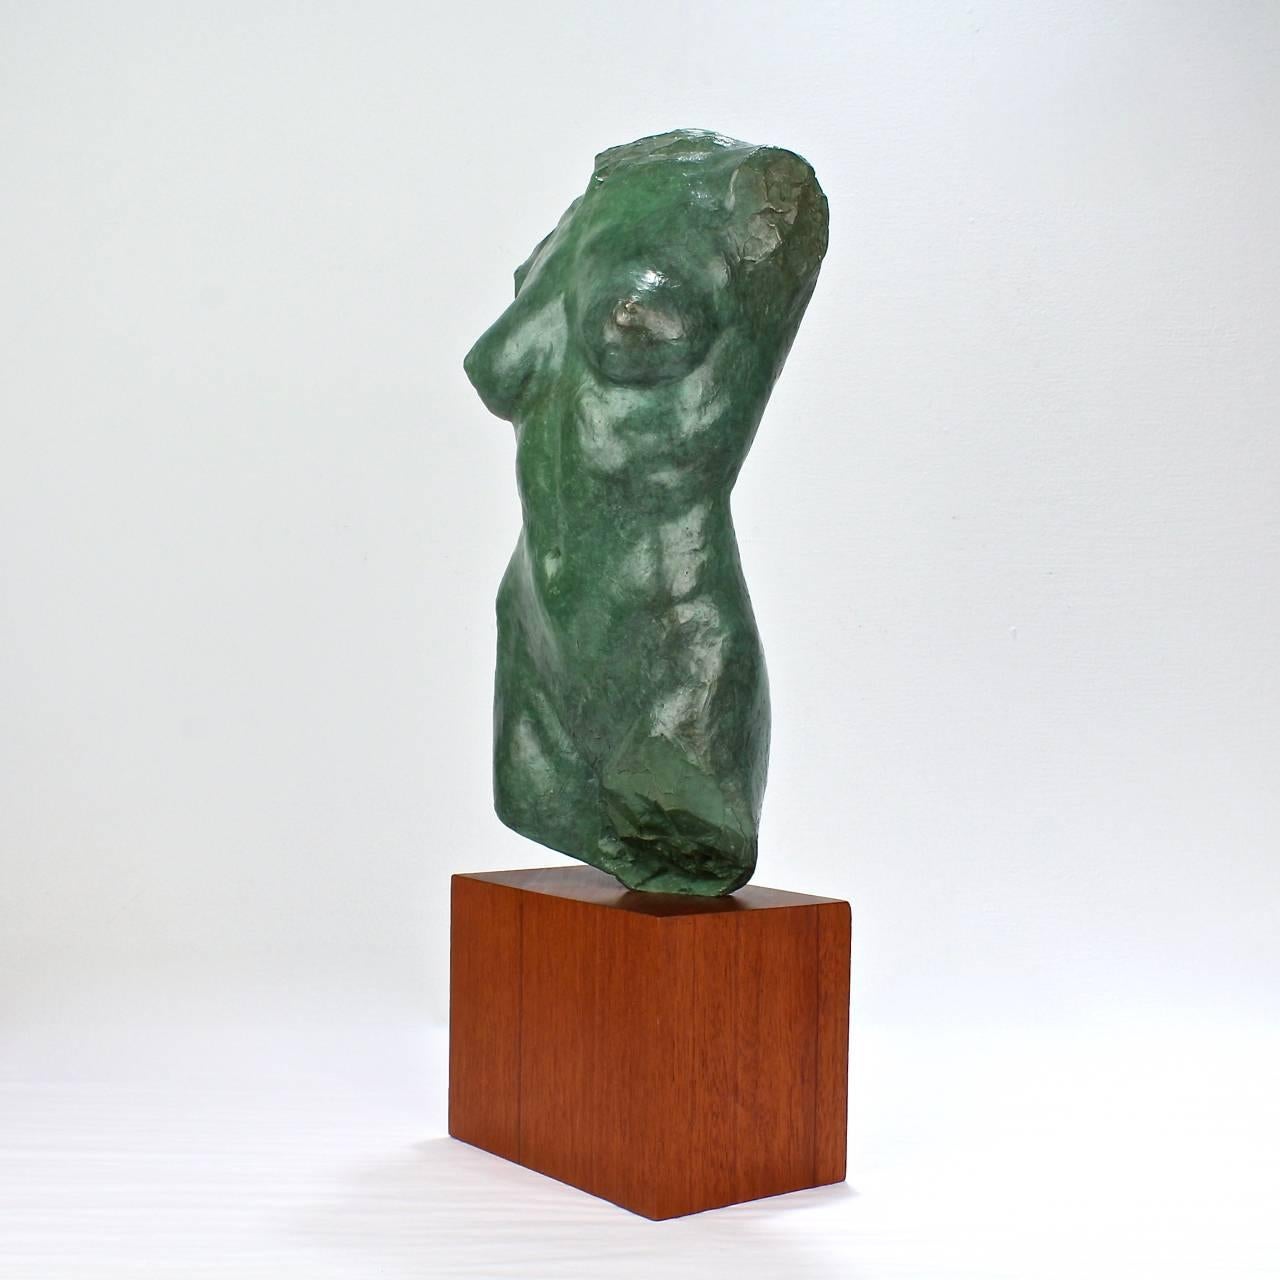 Cassiopeia

A bronze sculpture with verdigris patina of a nude female torso by Julia Levitina.

2009

Stamped with an edition number 2 of 9 and with the artist's monogram to the reverse. 

Mounted on a wooden plinth.

Height (including